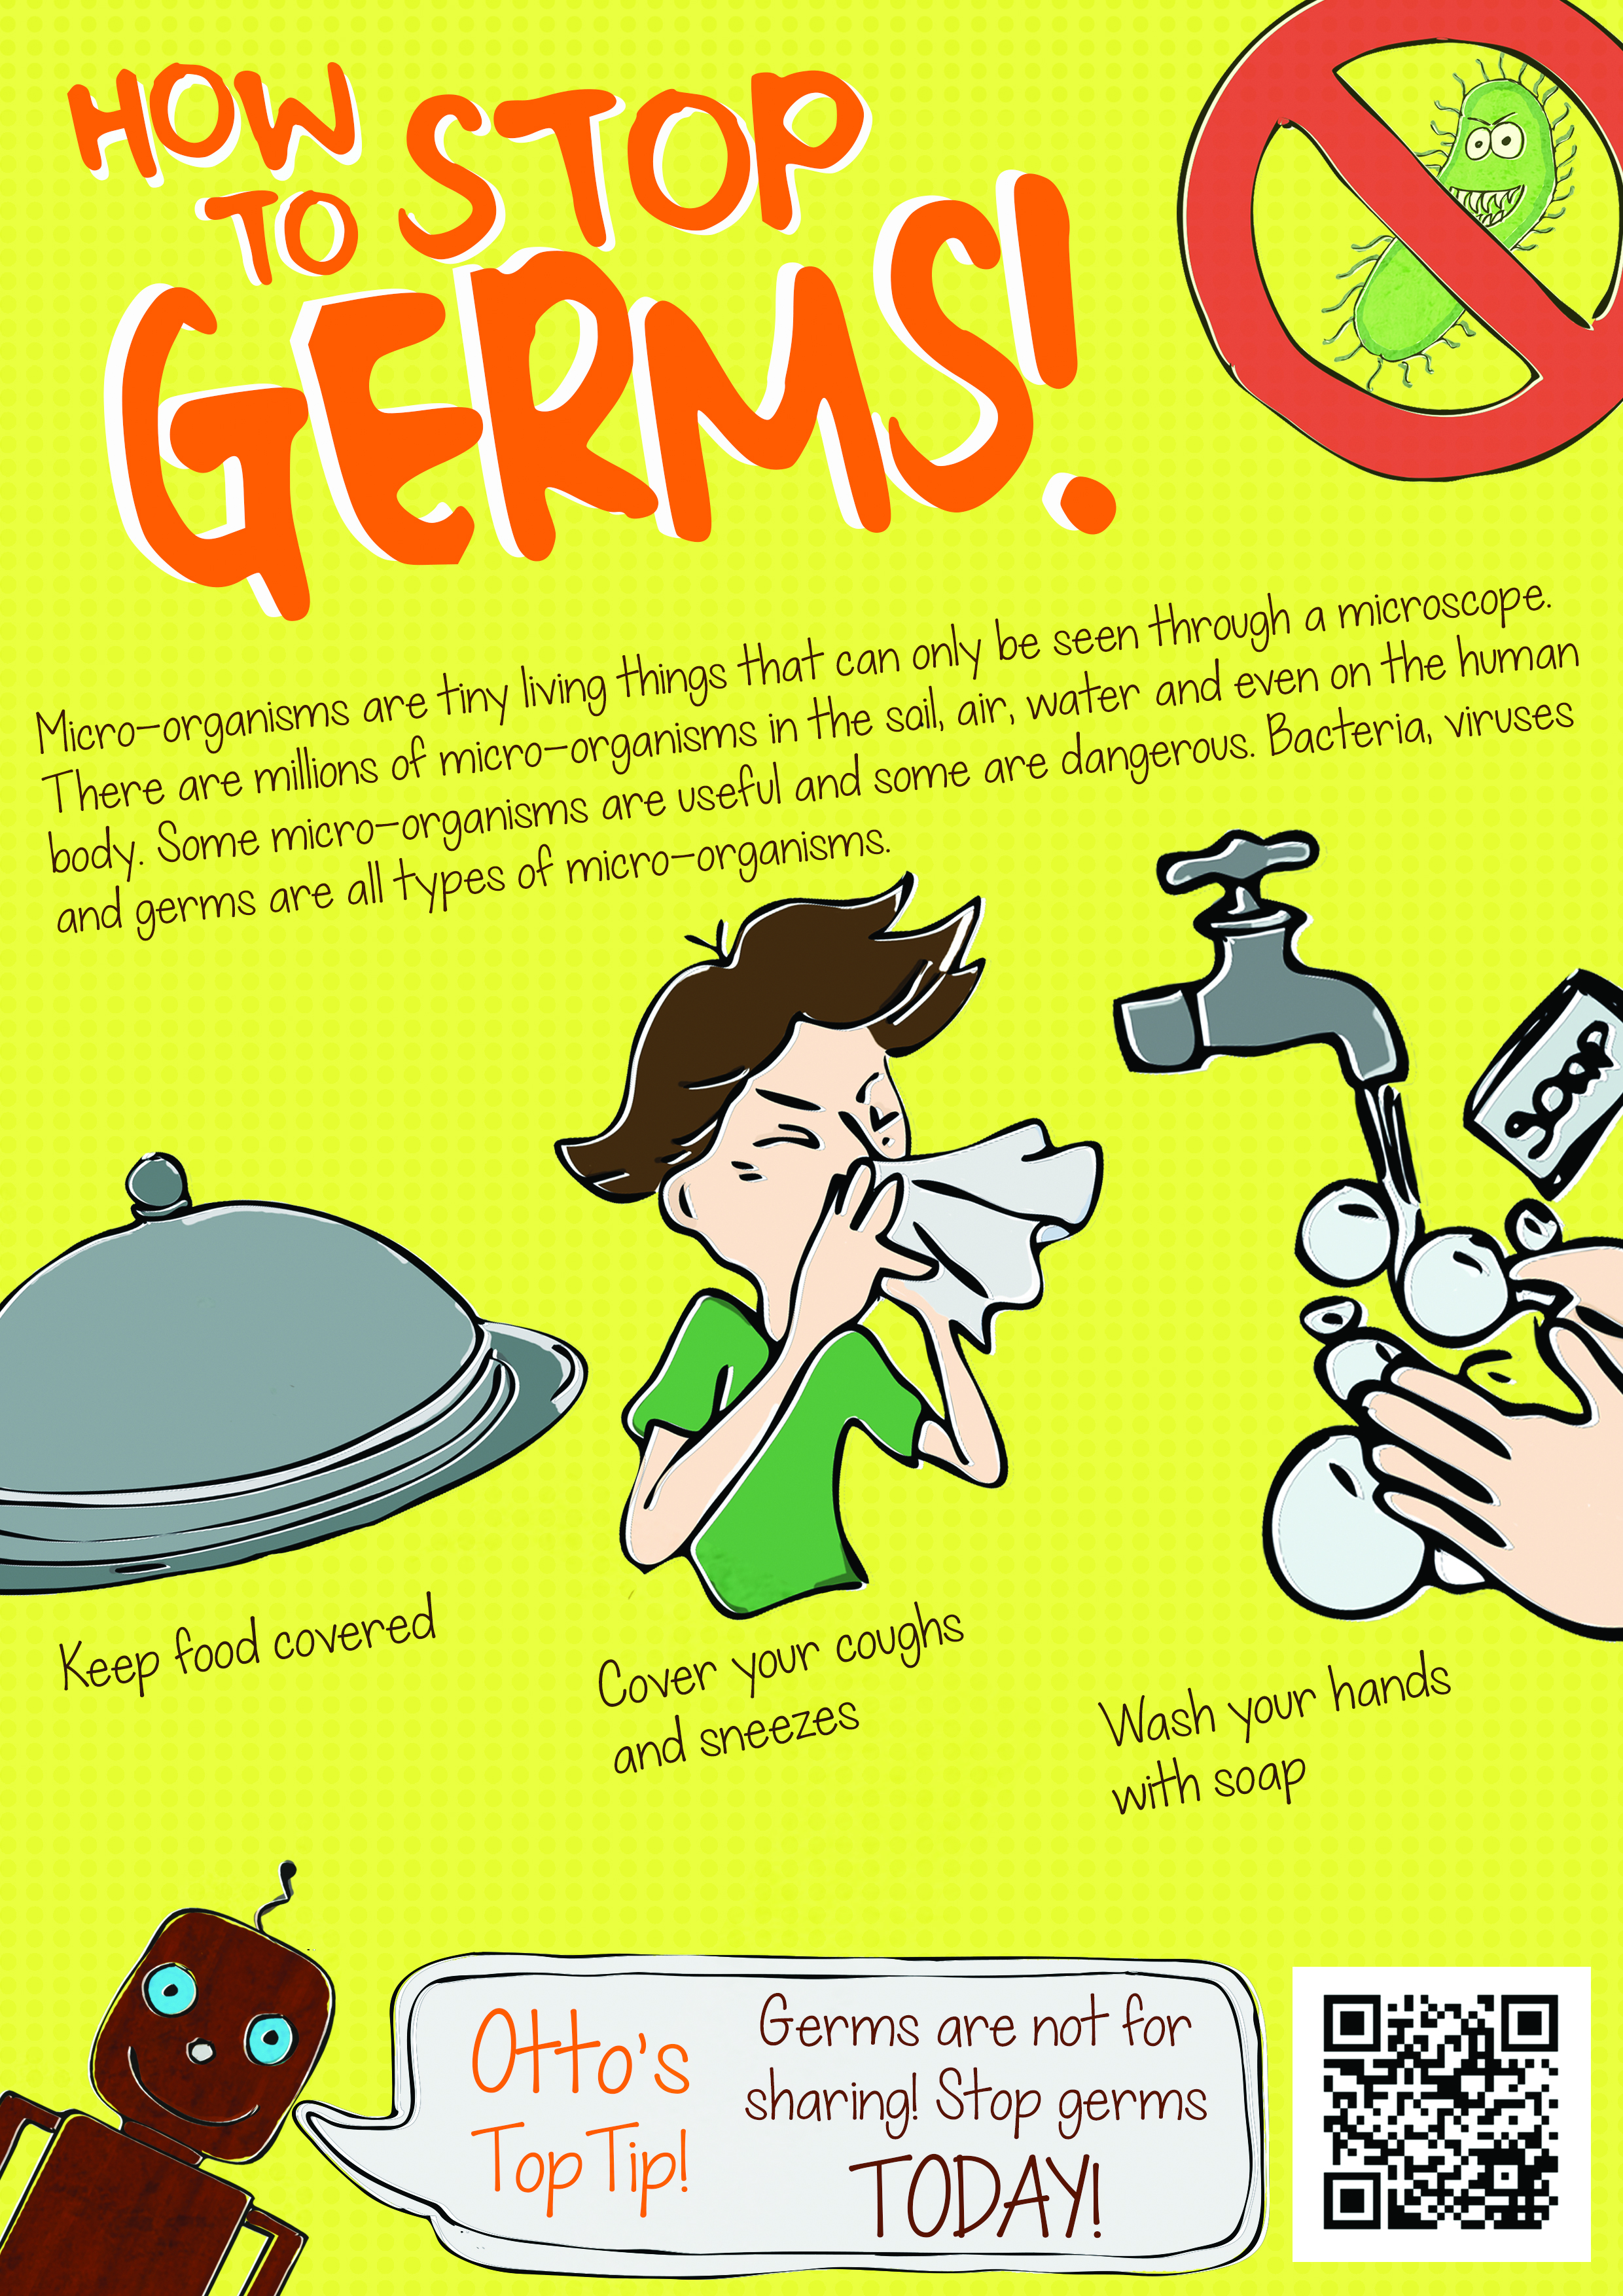 Germs перевод. Germs 1999 игра. About Germs. How to stop Germs poster. What are Germs? Книга цена.